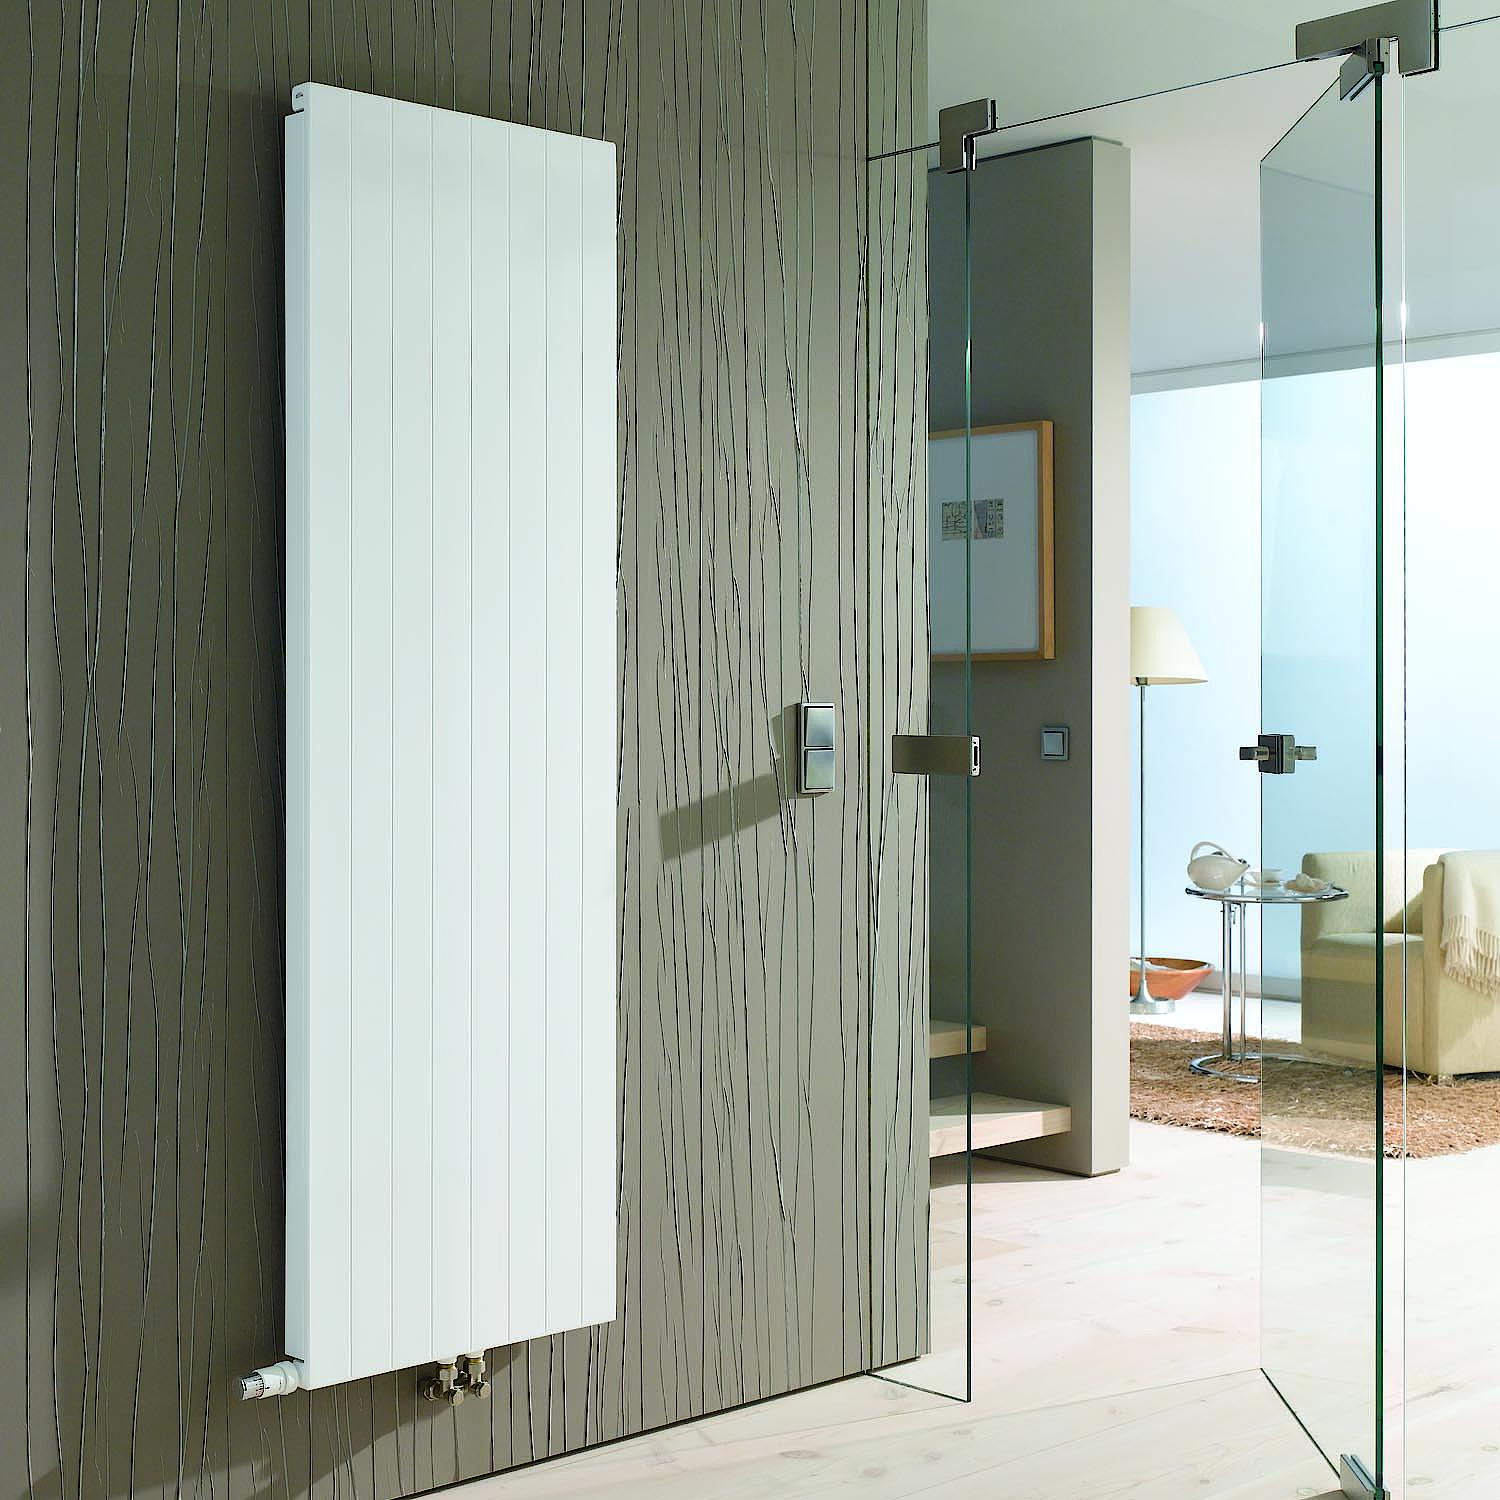 A vertical, slimline version of the Kermi valve heating panel in the form of a radiator that is tailored specifically to foyers, stairwells, and lobbies.